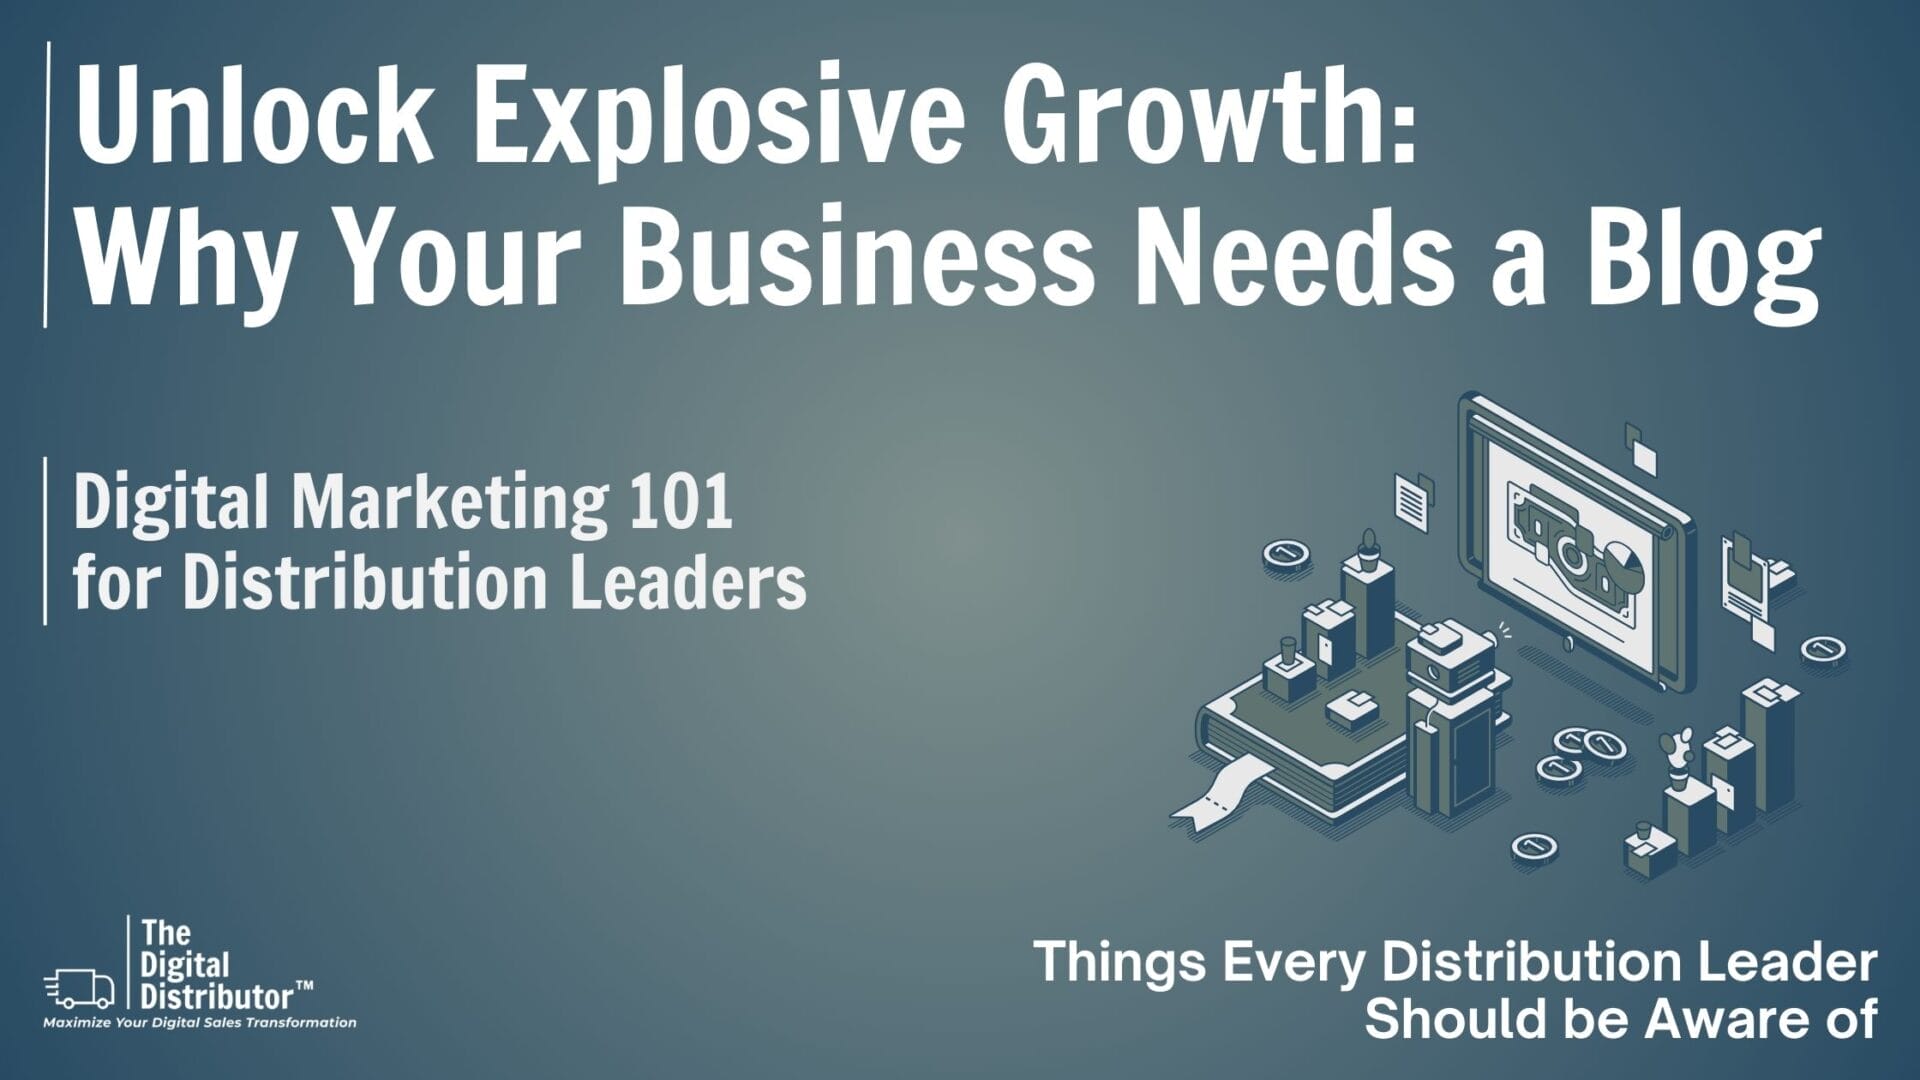 Unlock Explosive Growth: Why Your Business Needs a Blog